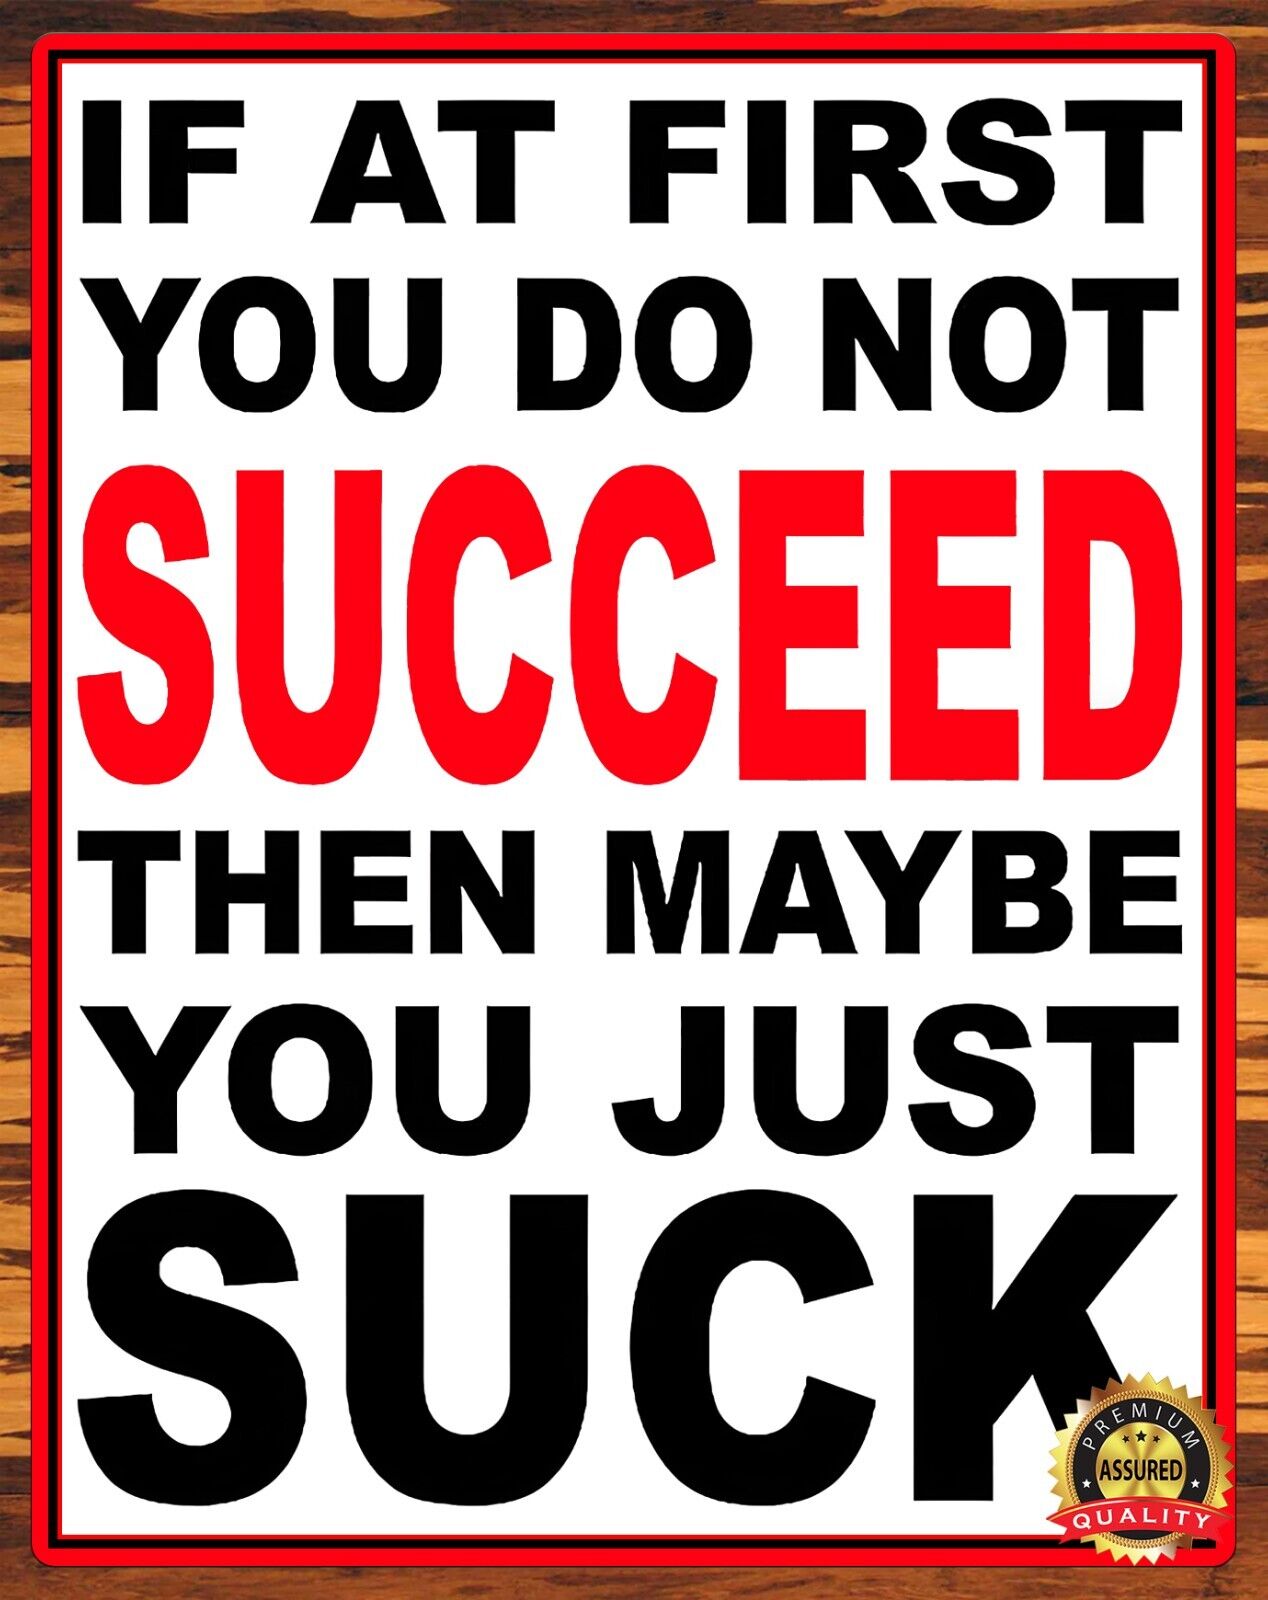 If At First You Do Not Succeed Then Maybe You Just Suck - Metal Sign 11 x 14